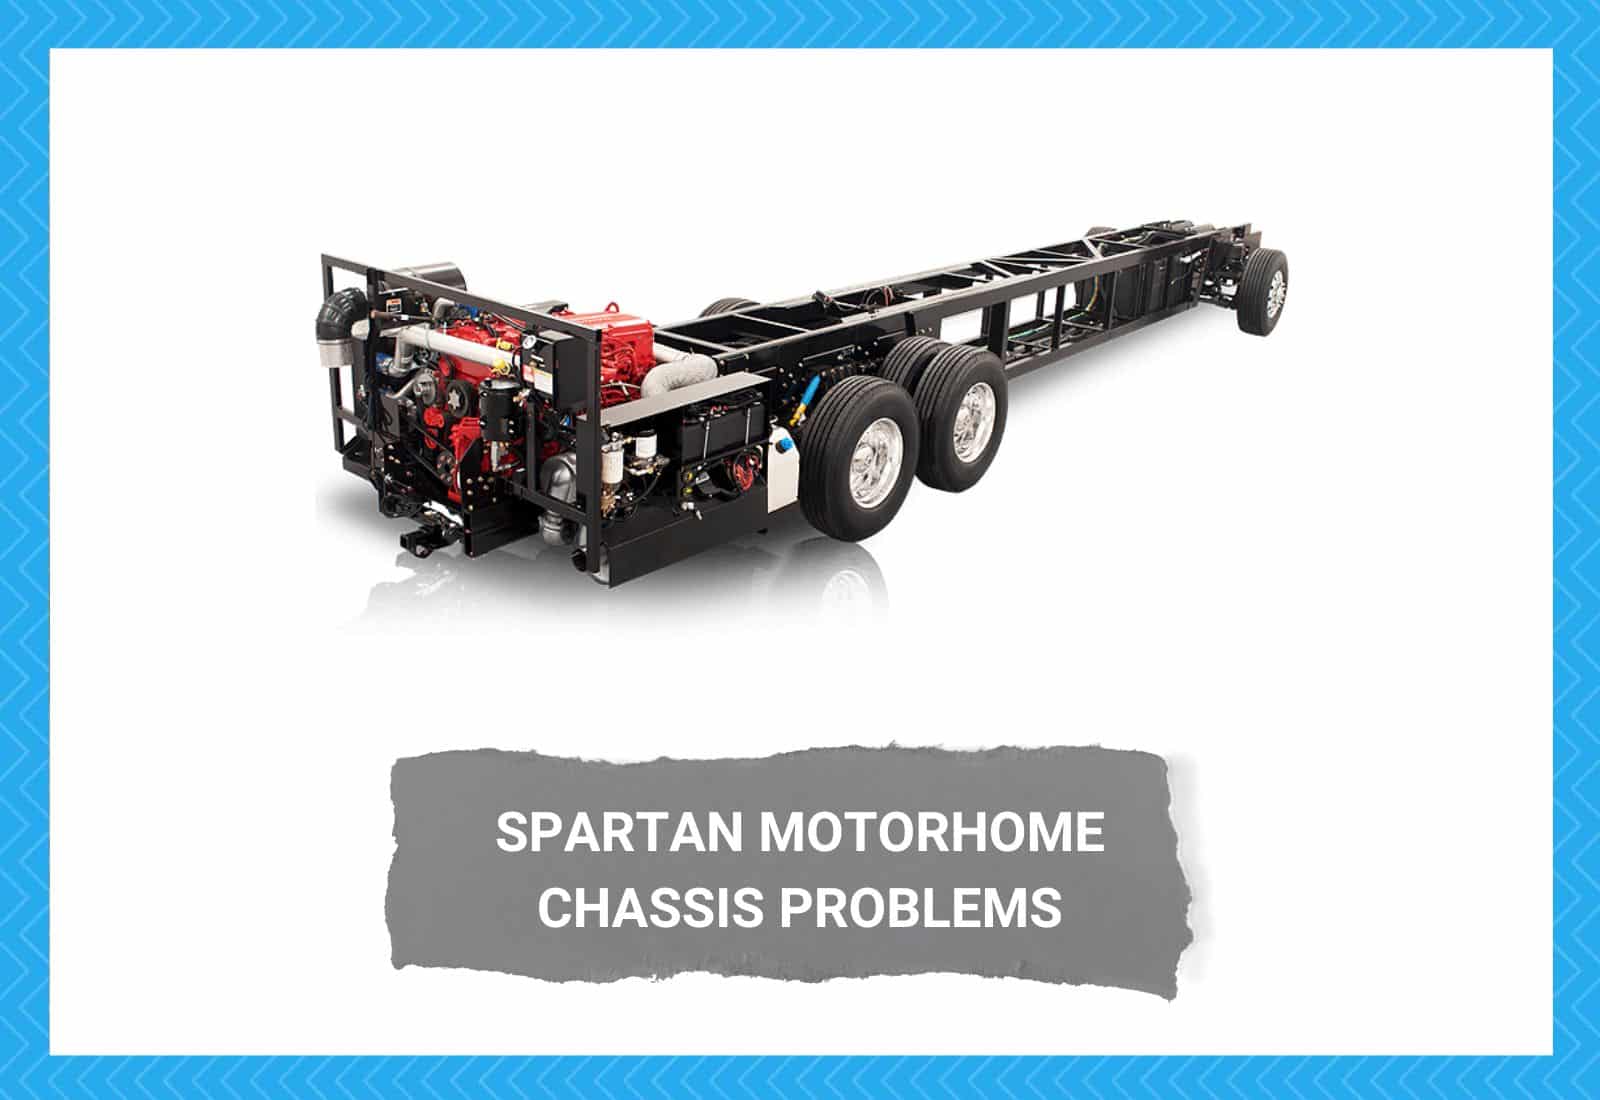 Spartan Motorhome Chassis Problems